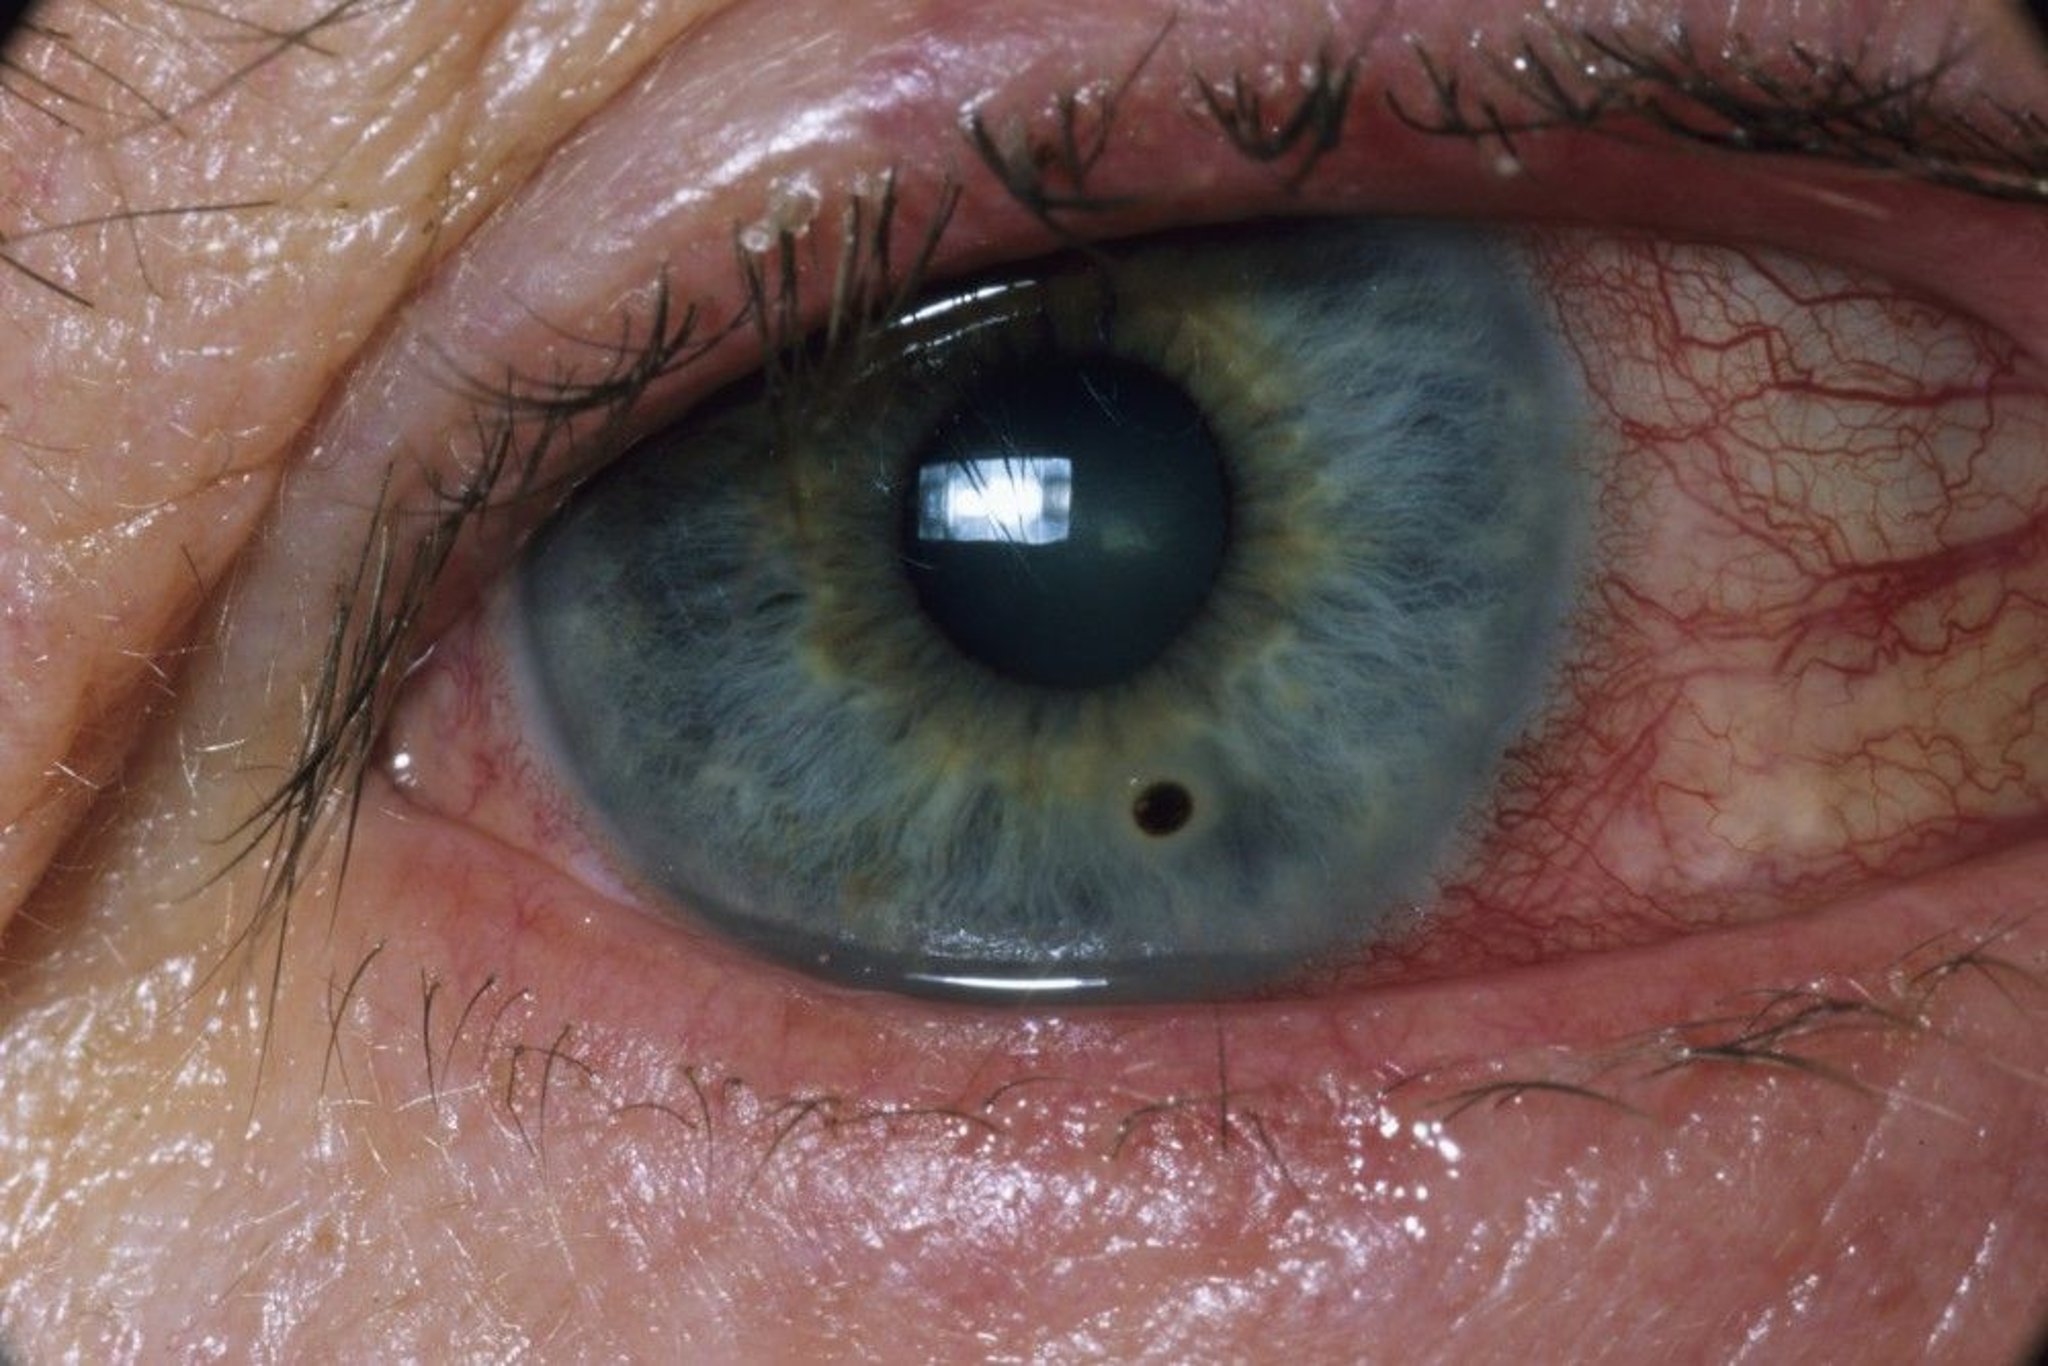 Foreign Body in Eye